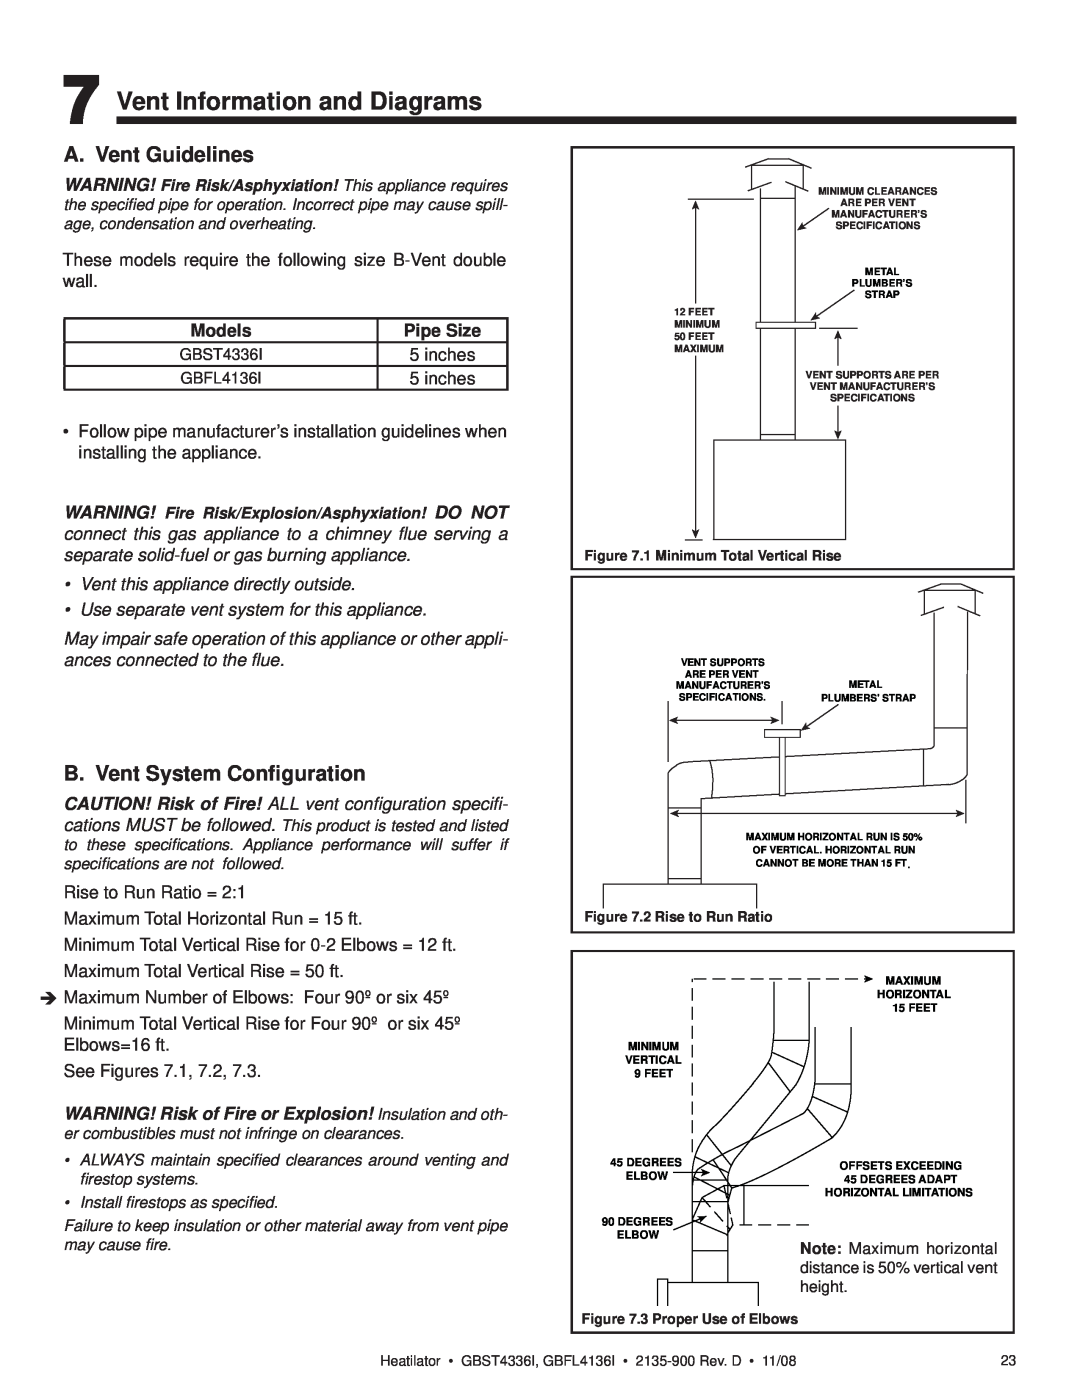 Hearth and Home Technologies GBST4336I Vent Information and Diagrams, A. Vent Guidelines, B. Vent System Conﬁguration 